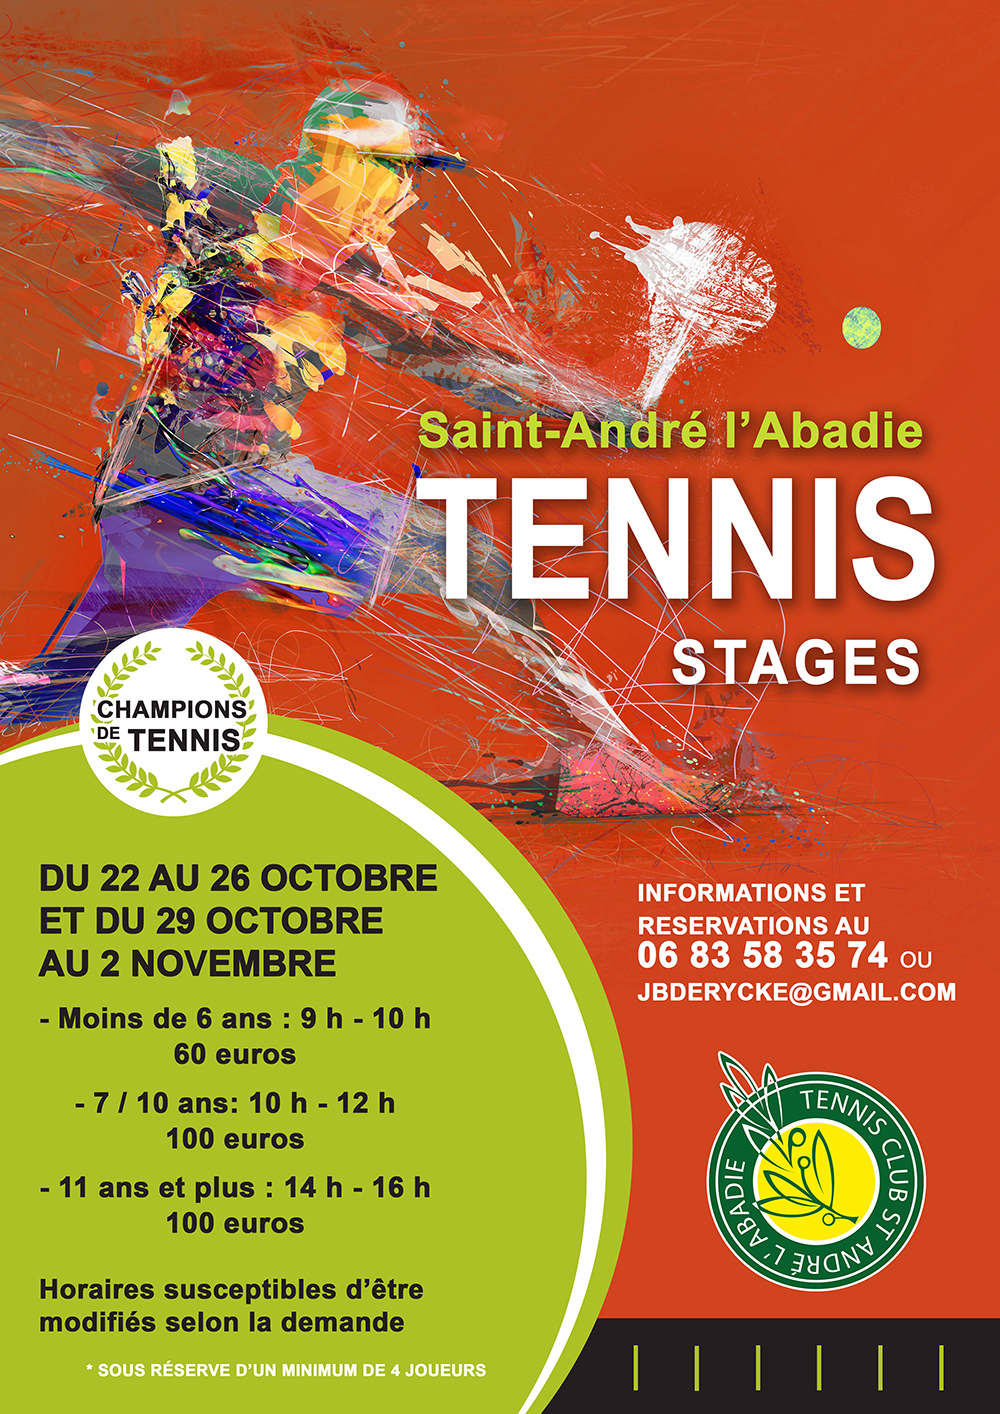 stage tennis